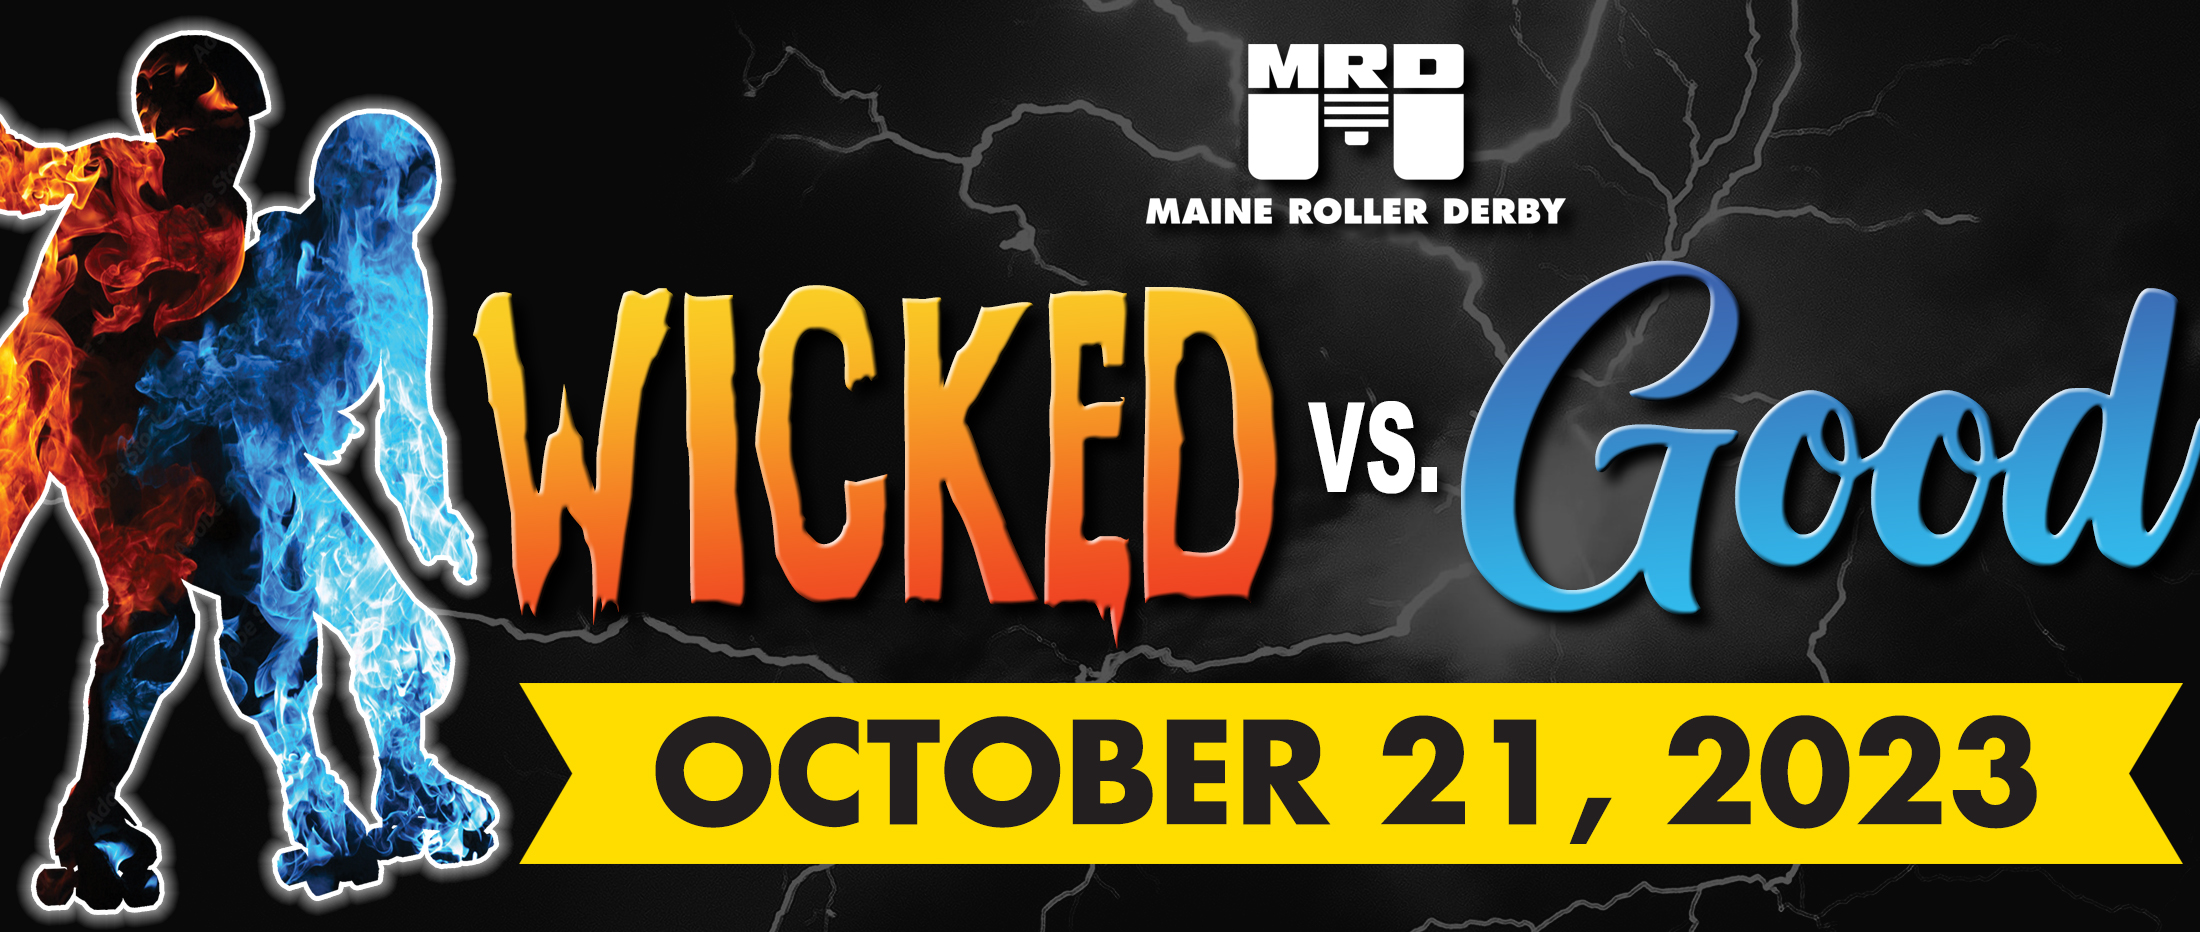 2023 Wicked vs. Good Bout slider image featuring a skater in blue flames pushing against a skater in red flames, linking to the event page